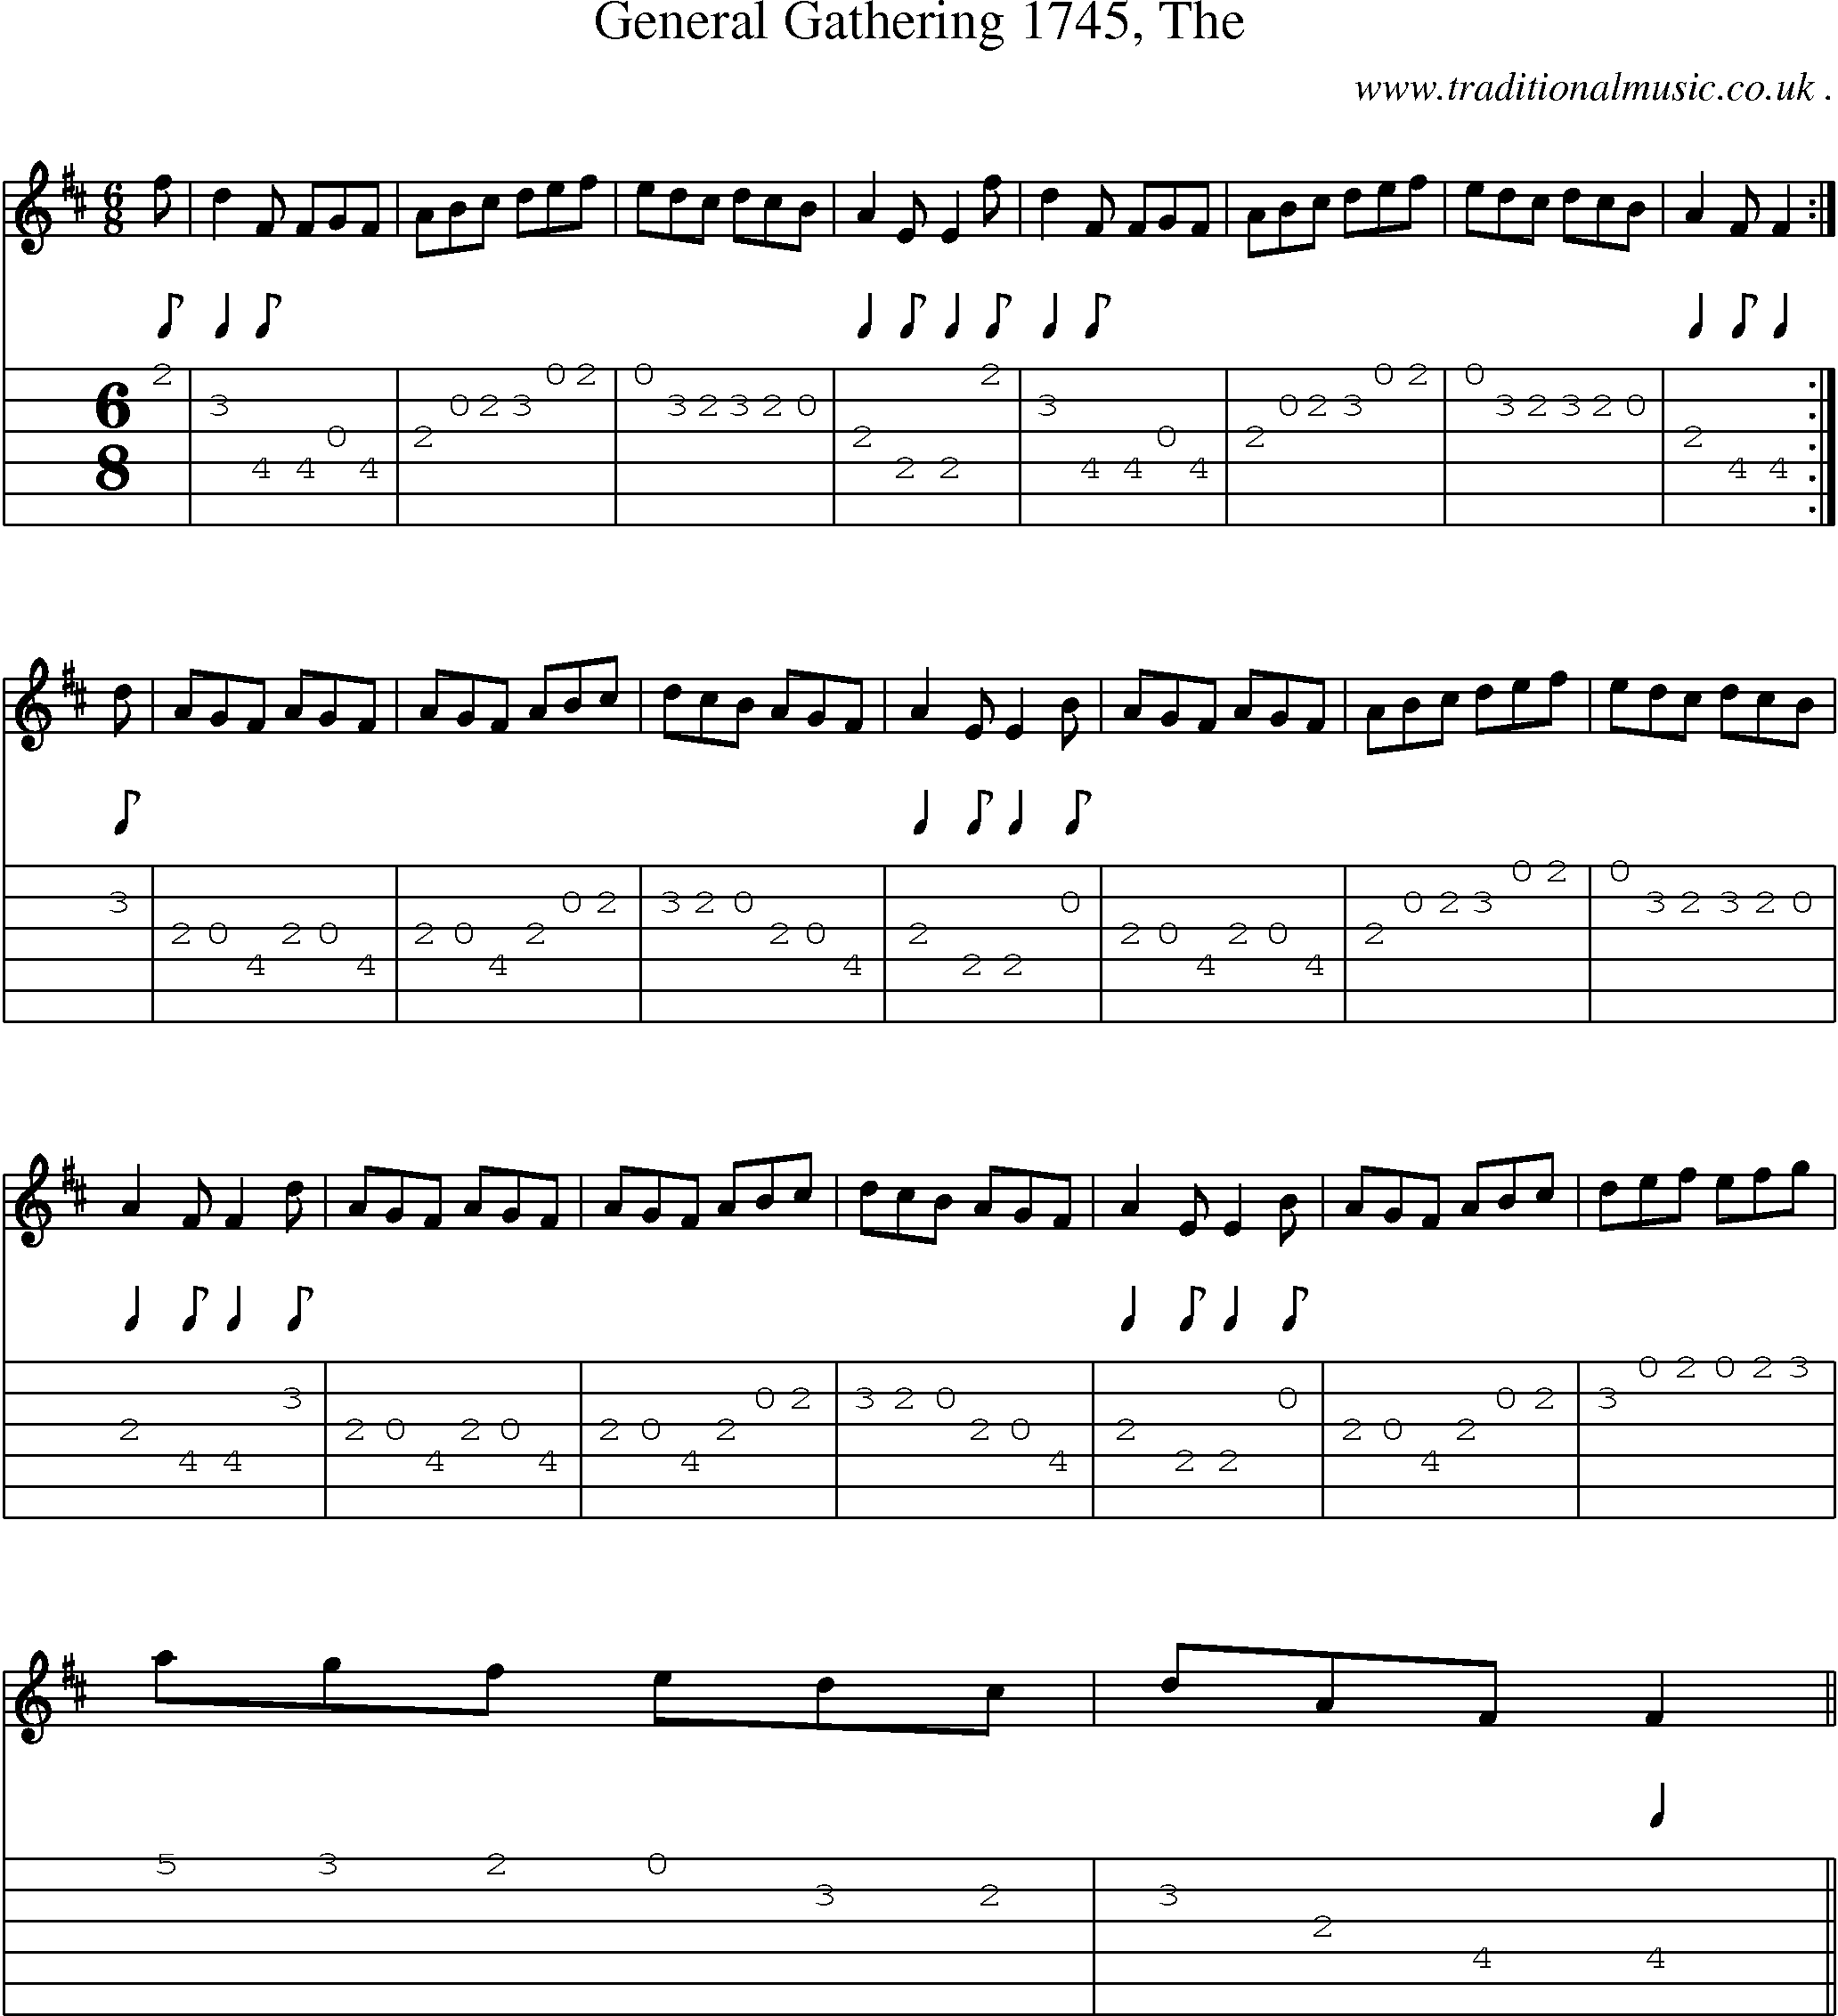 Sheet-music  score, Chords and Guitar Tabs for General Gathering 1745 The